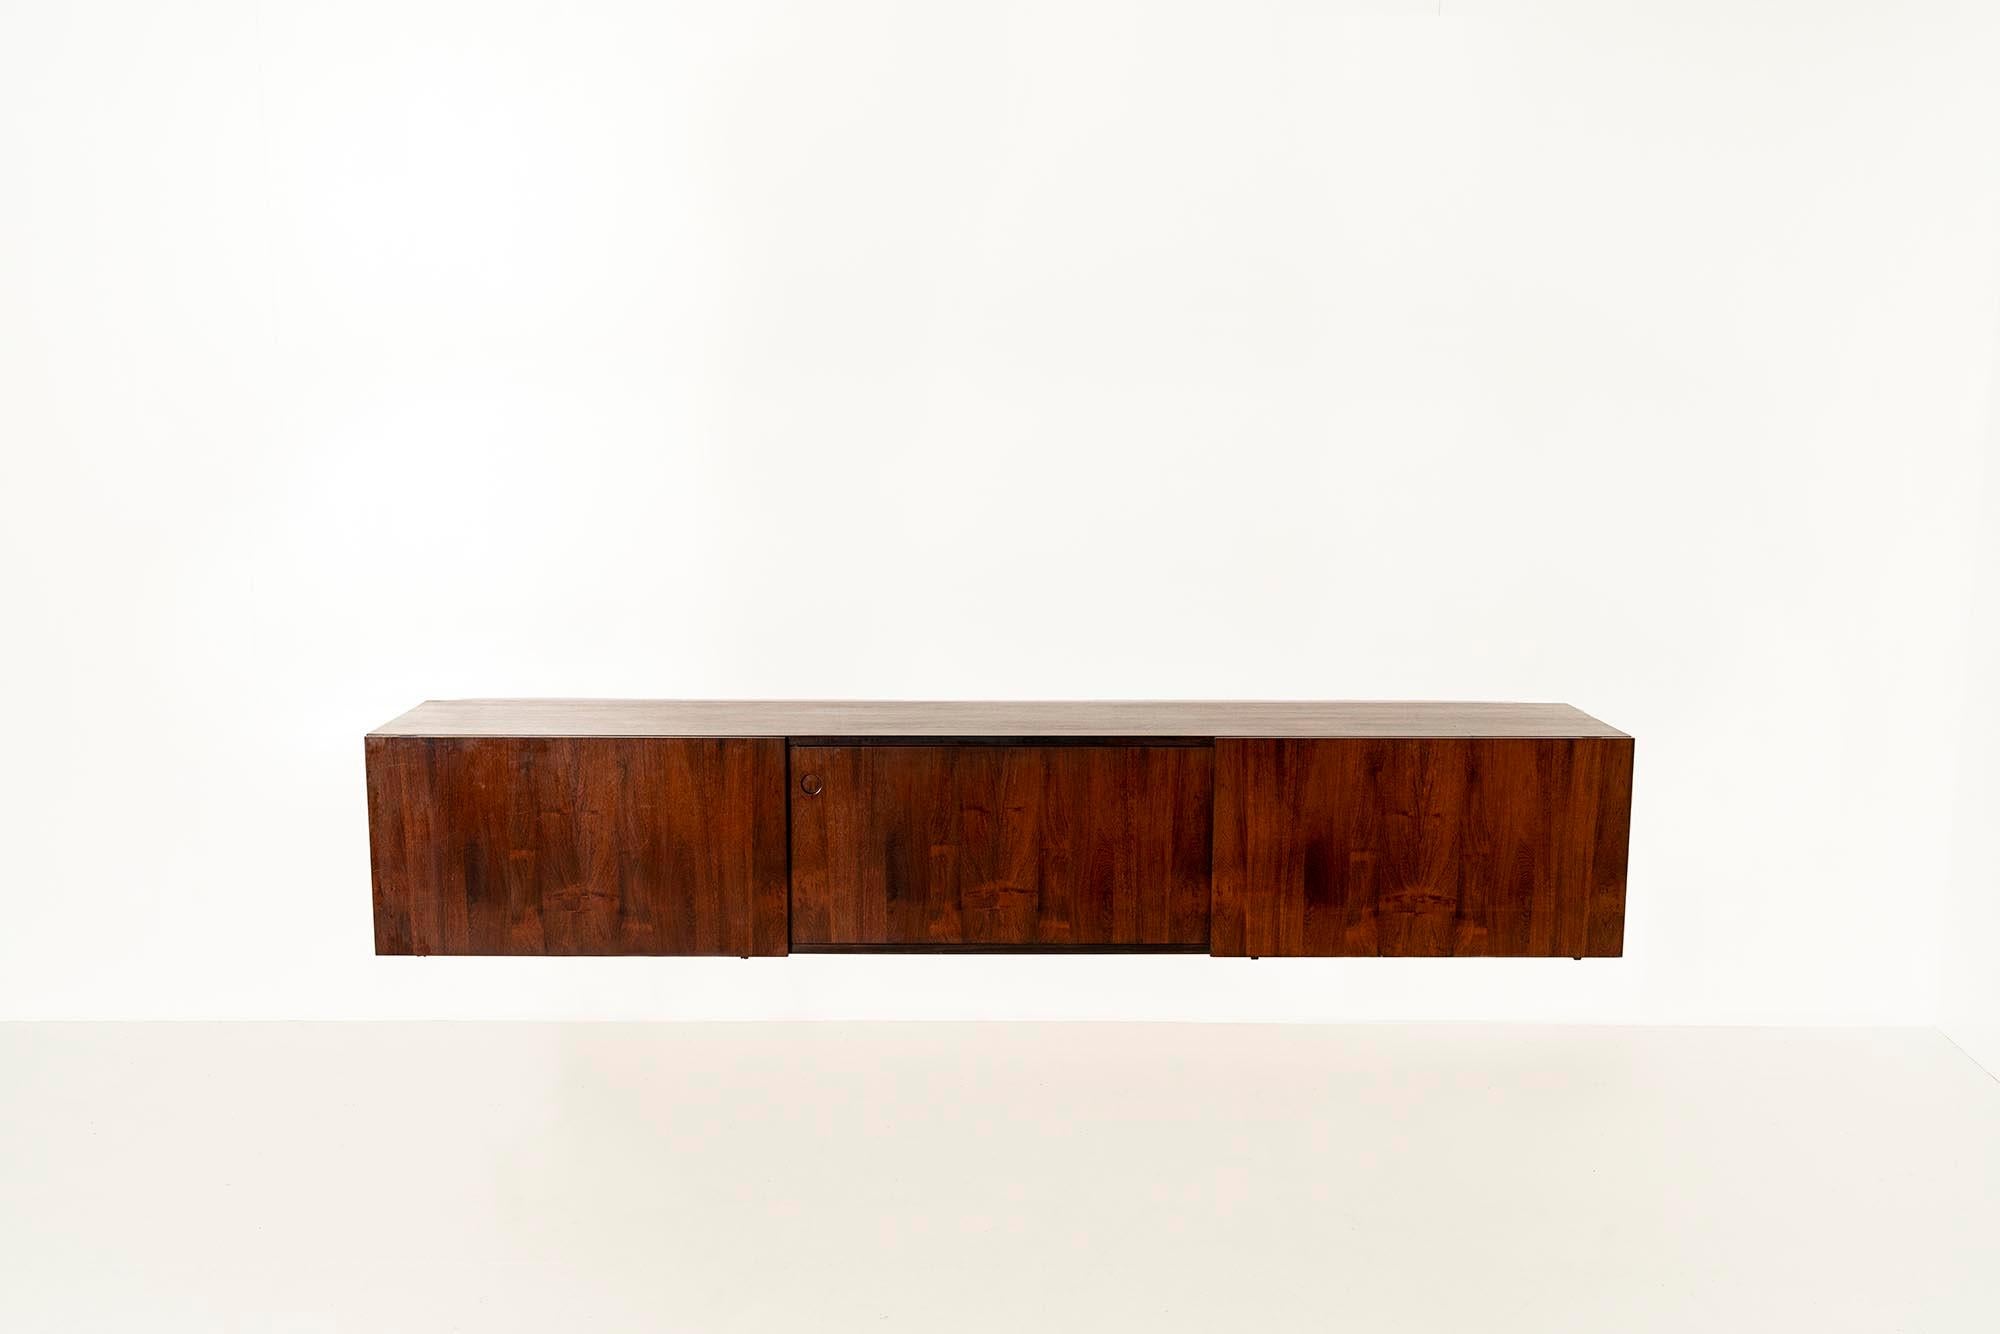 Elegant Danish floating wall-mounted sideboard by IB Kofod Larsen from the 1970s.

This beautiful sideboard is finished in rosewood veneer. Showing an intriguing and similar pattern on the sliding doors that close off the three separate